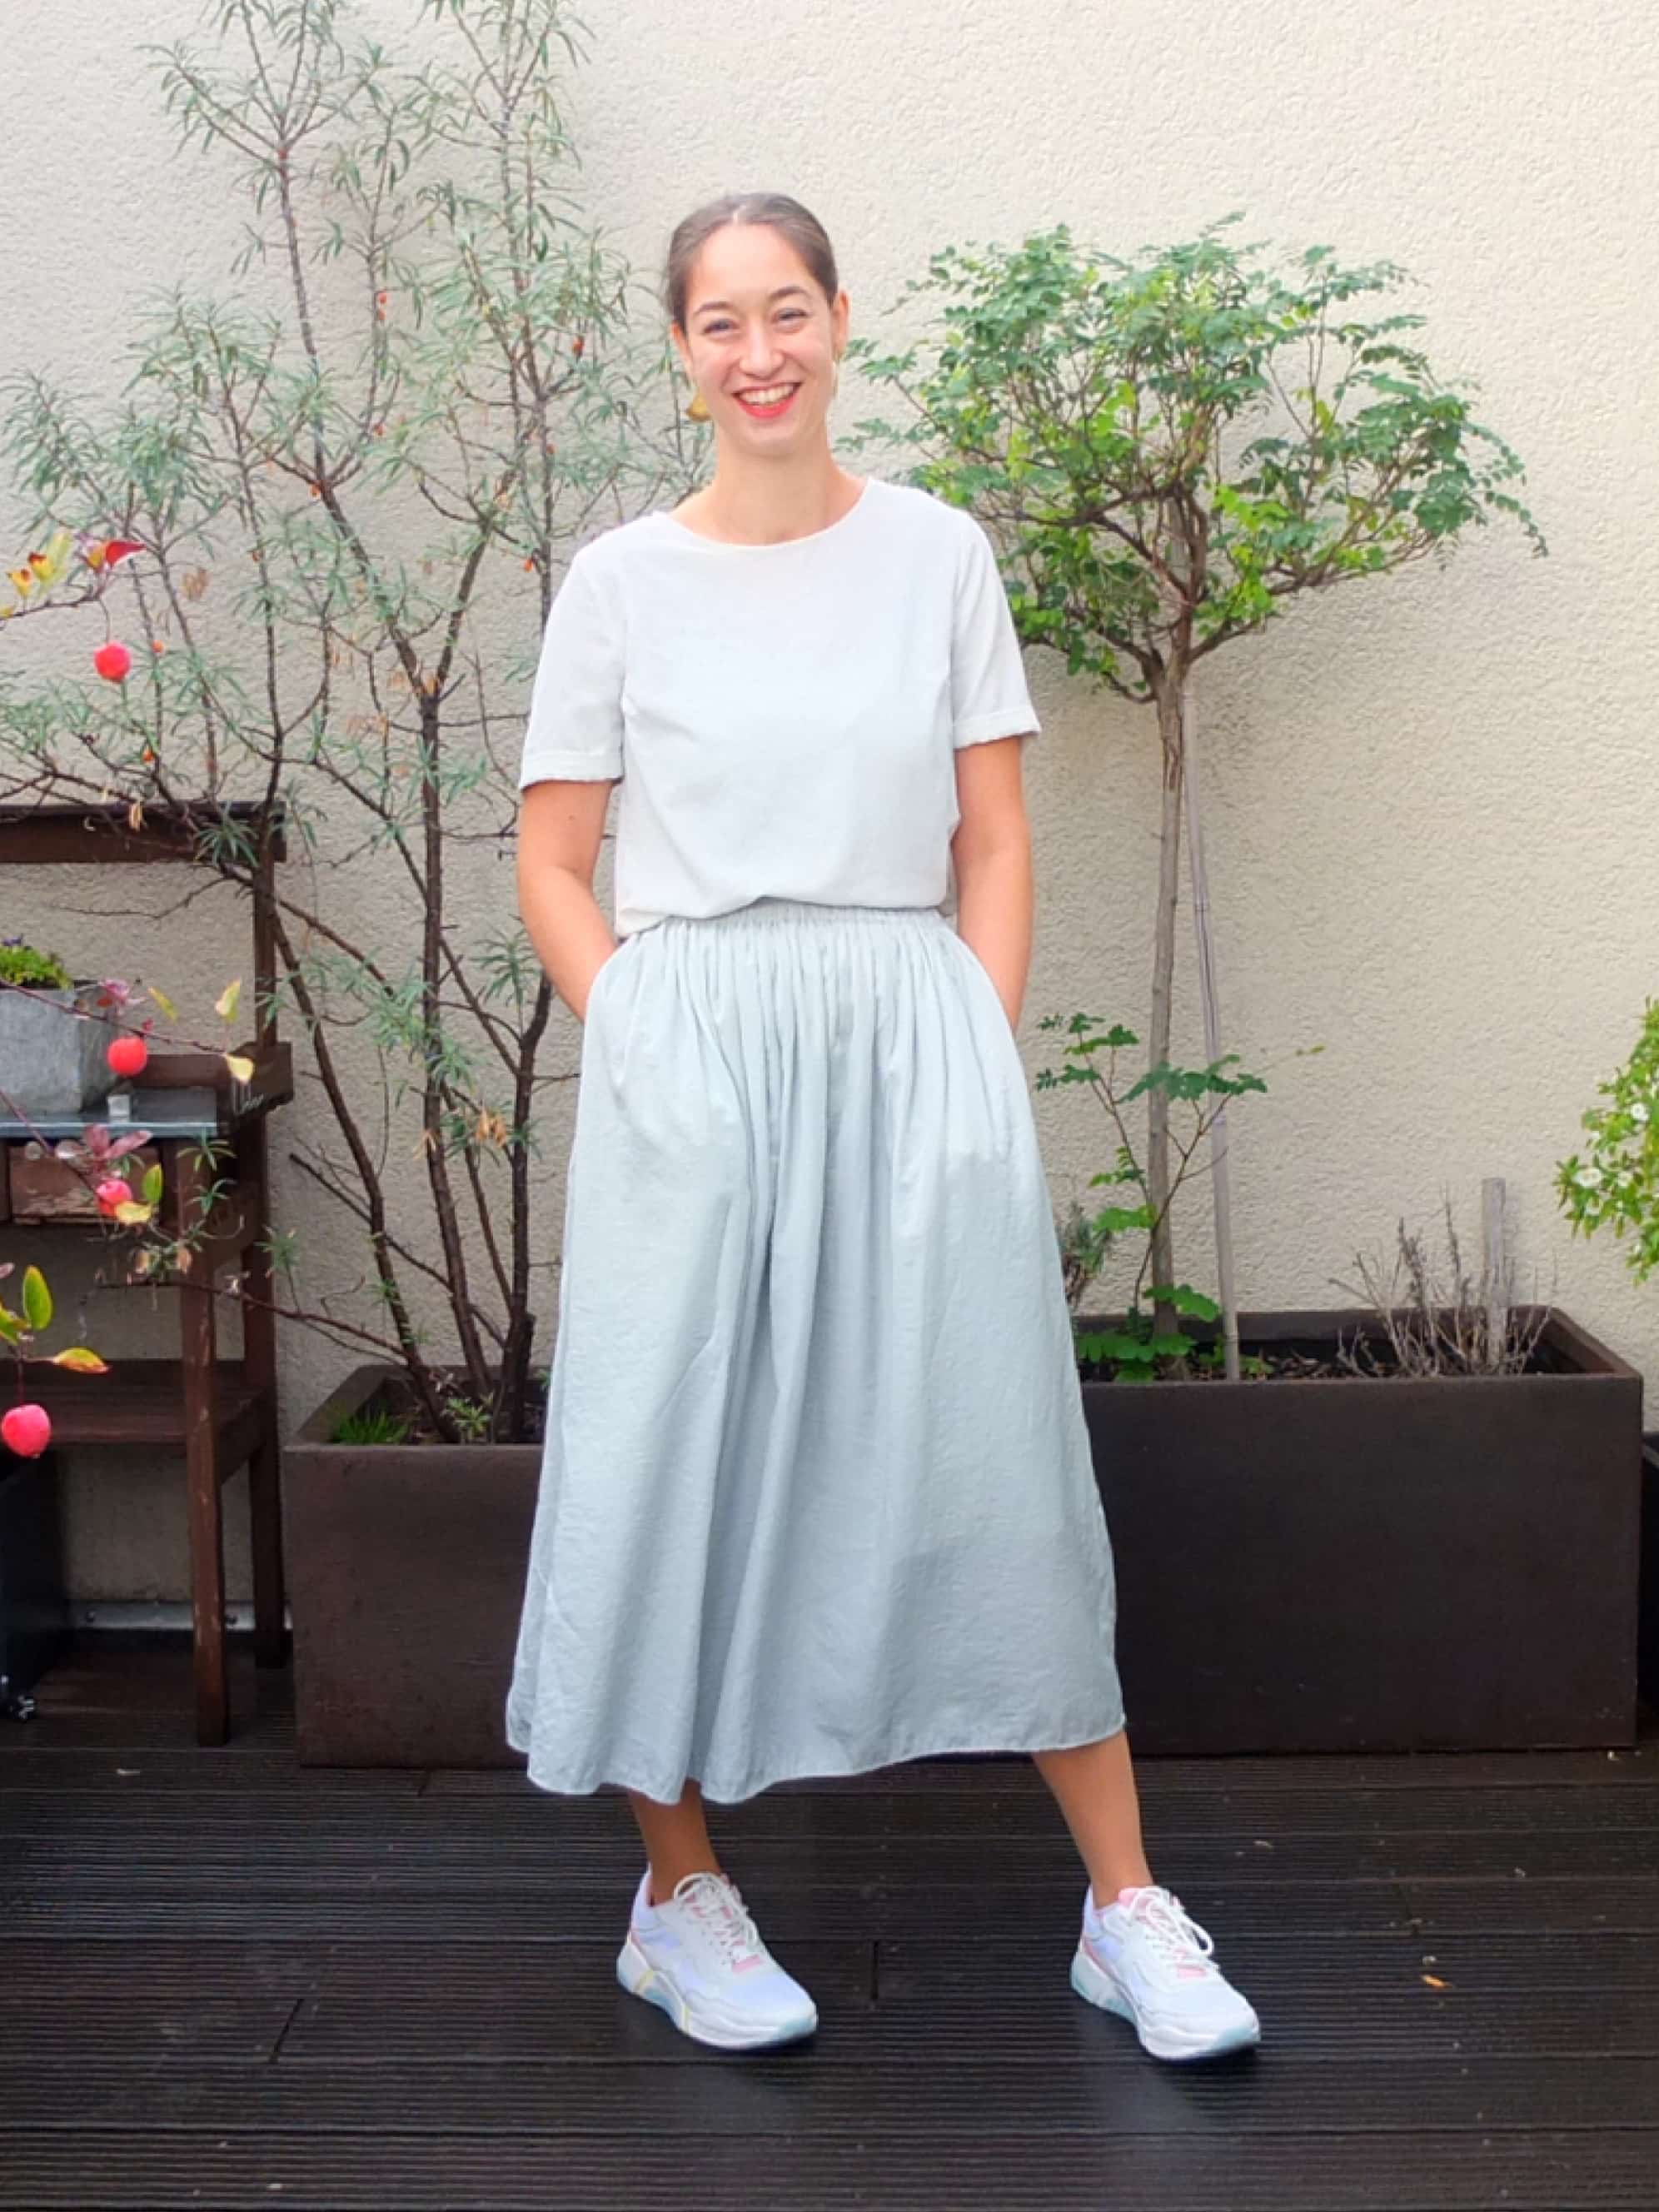 A woman in a light blue skirt and white shirt is standing on a roof terrace.